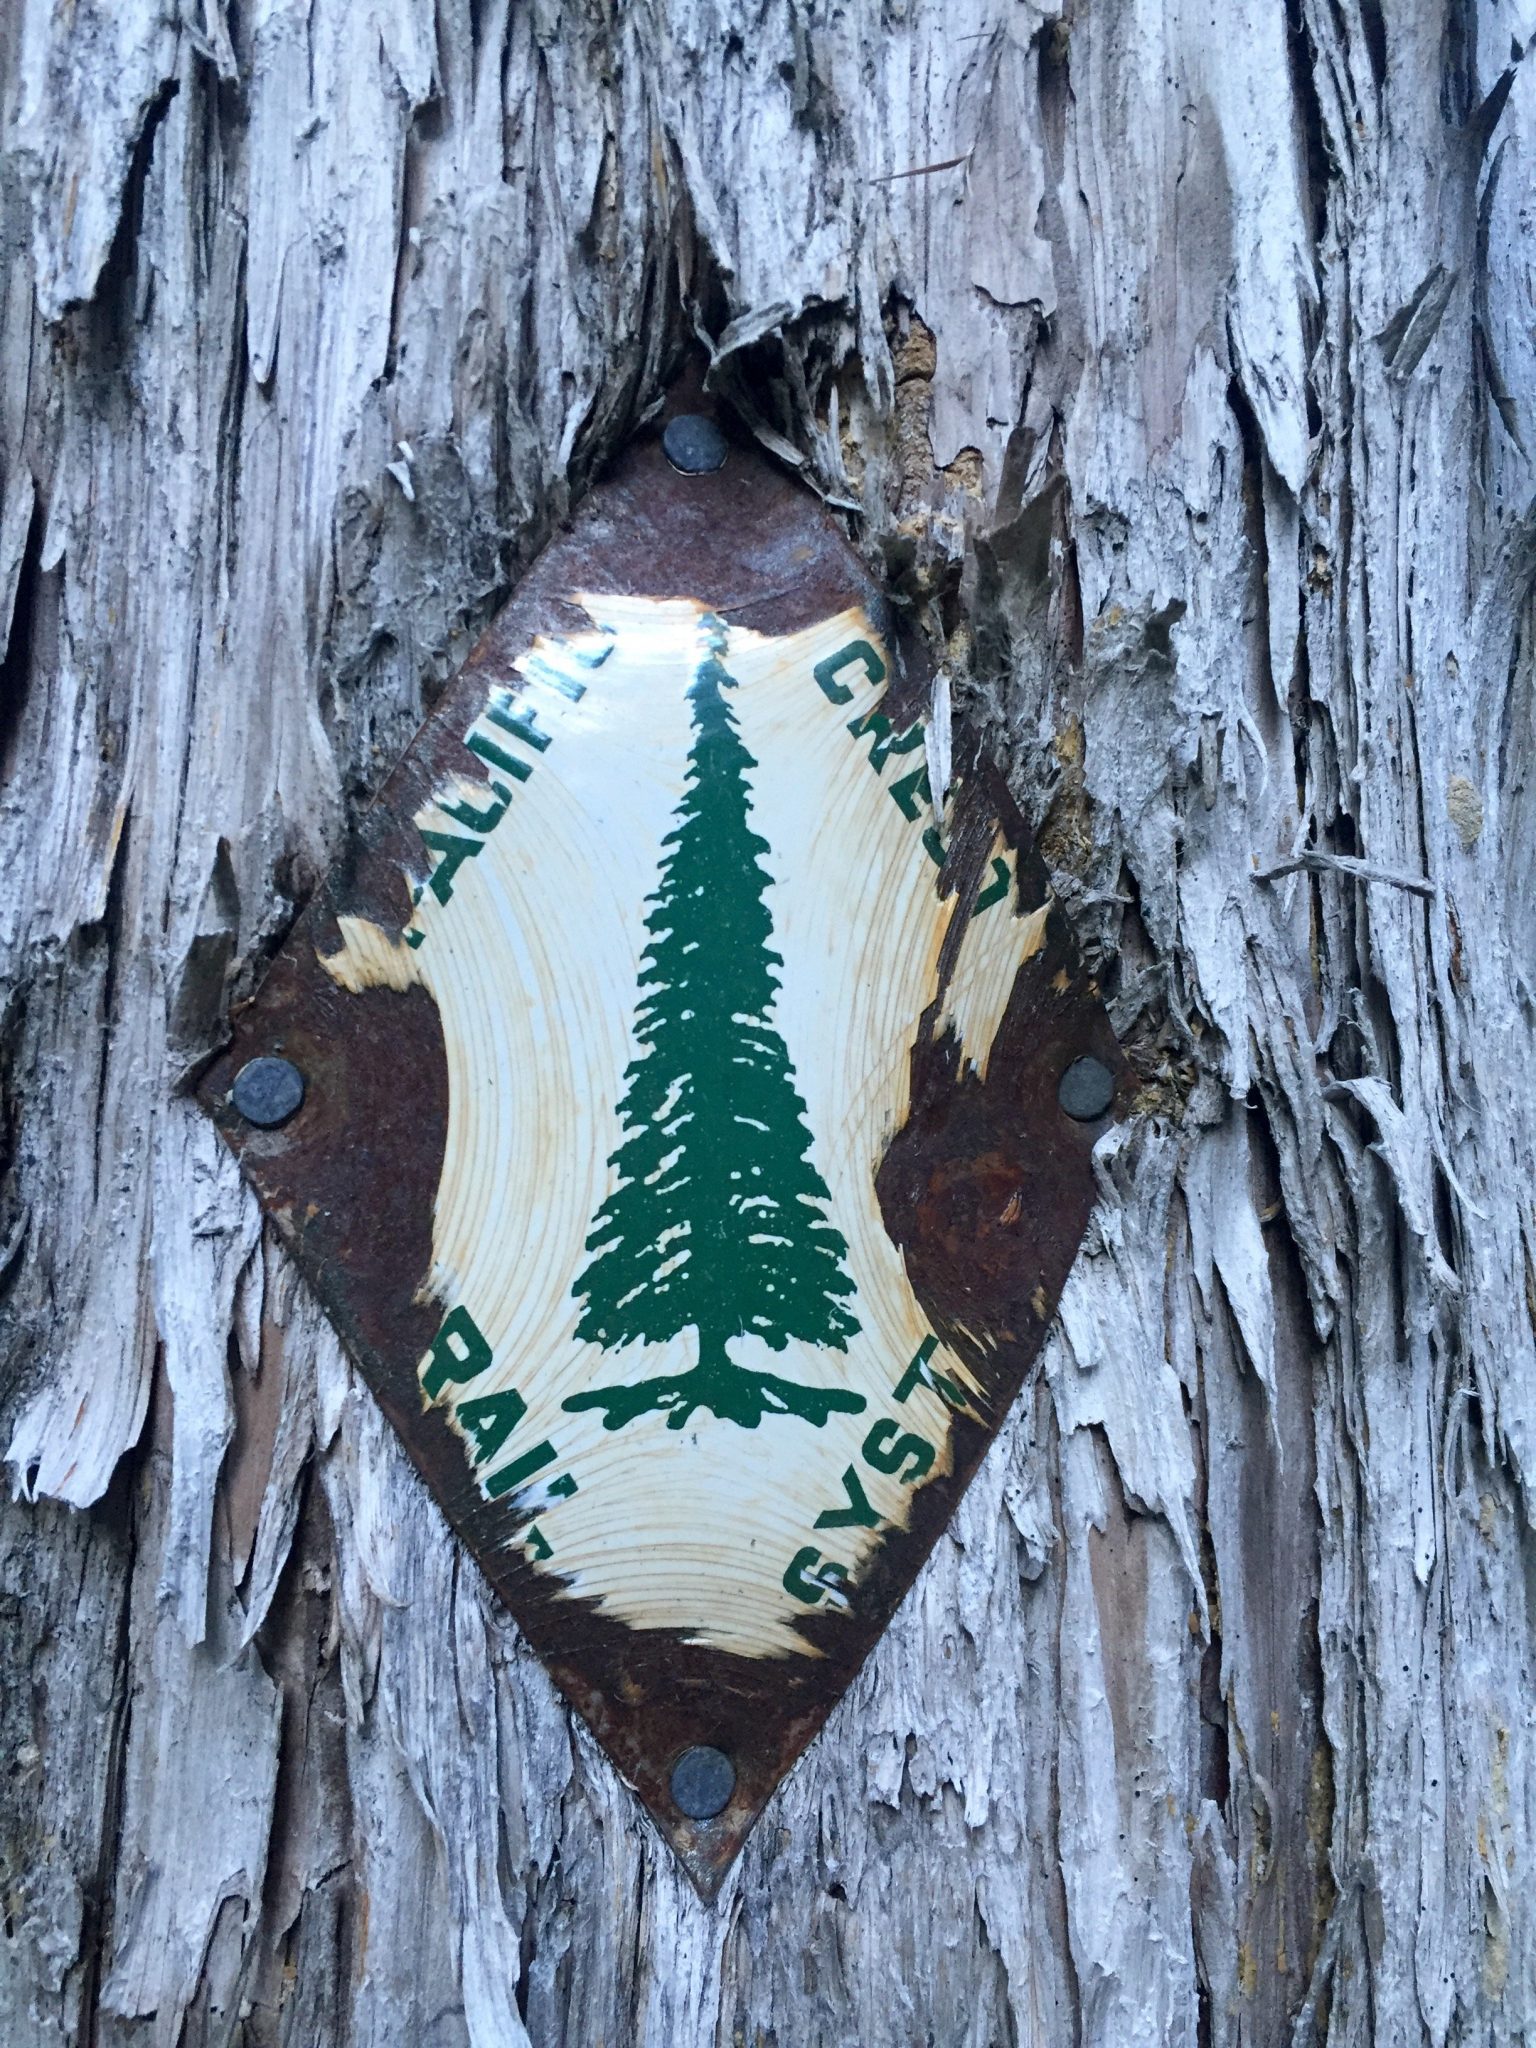 Original diamond shaped Pacific Crest Trail marker with a single evergreen logo